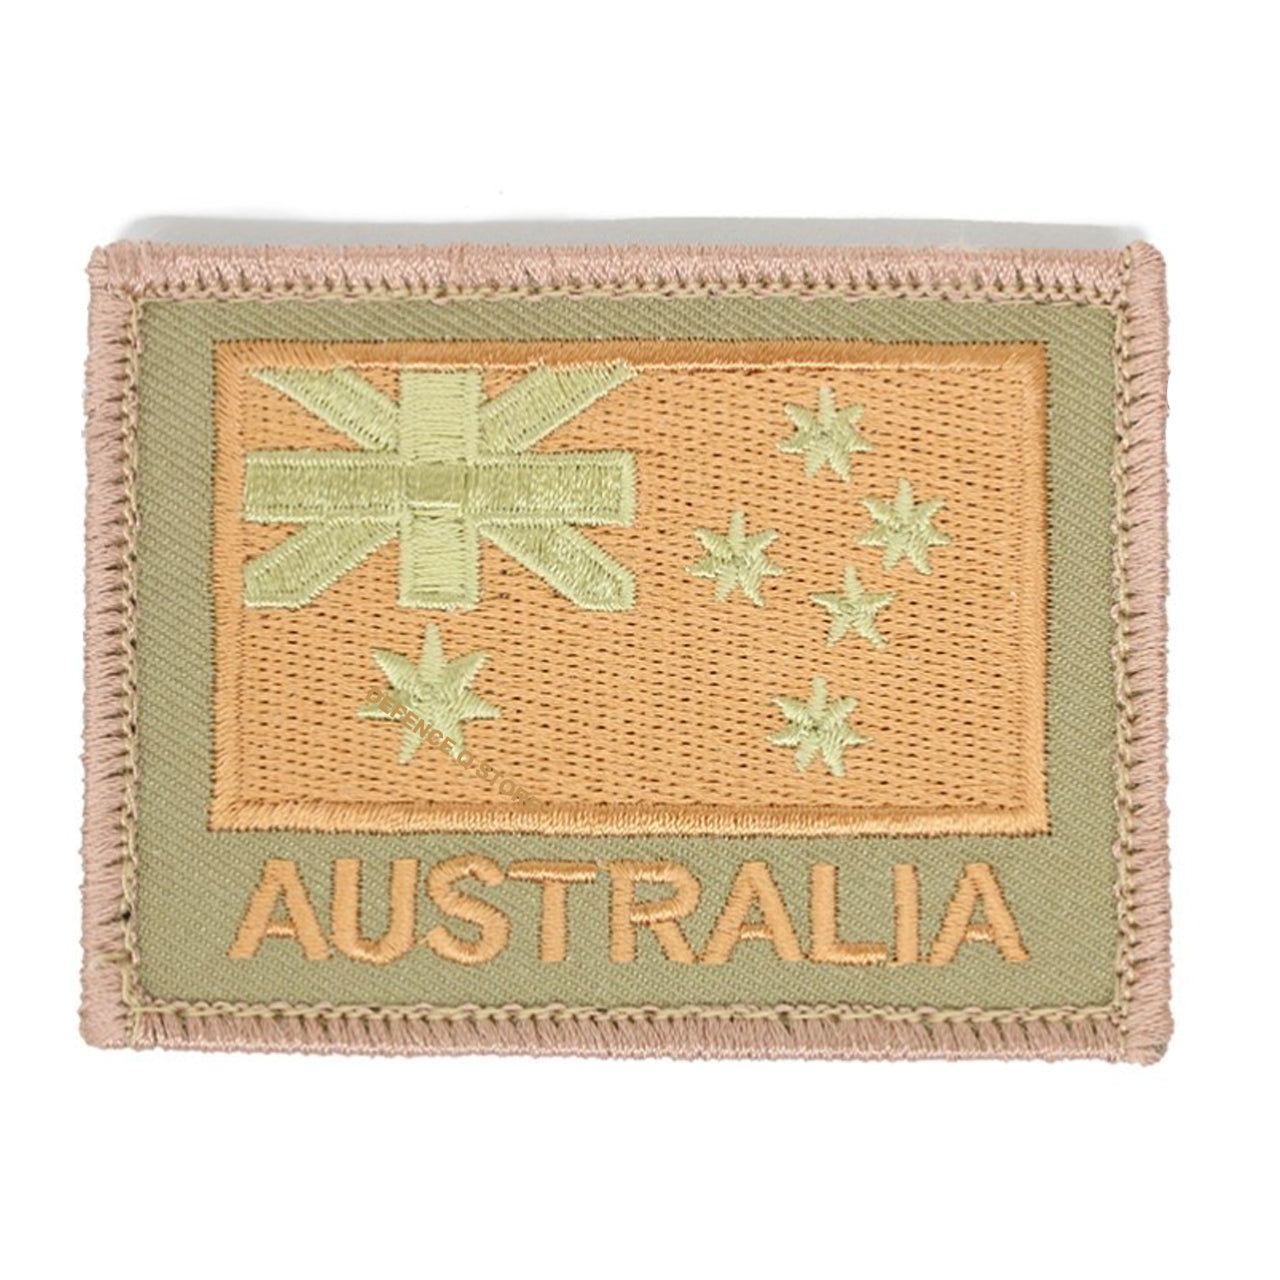 The Australia Flag Tan On Khaki Embroidery Velcro Backed Patch features our embroidery style Australian National flag on a stylish khaki background, complete with the inspiring word "AUSTRALIA" underneath. Measuring 75 x 55mm, this patch is the perfect way to show your love for Australia in a subtle yet powerful way. www.defenceqstore.com.au